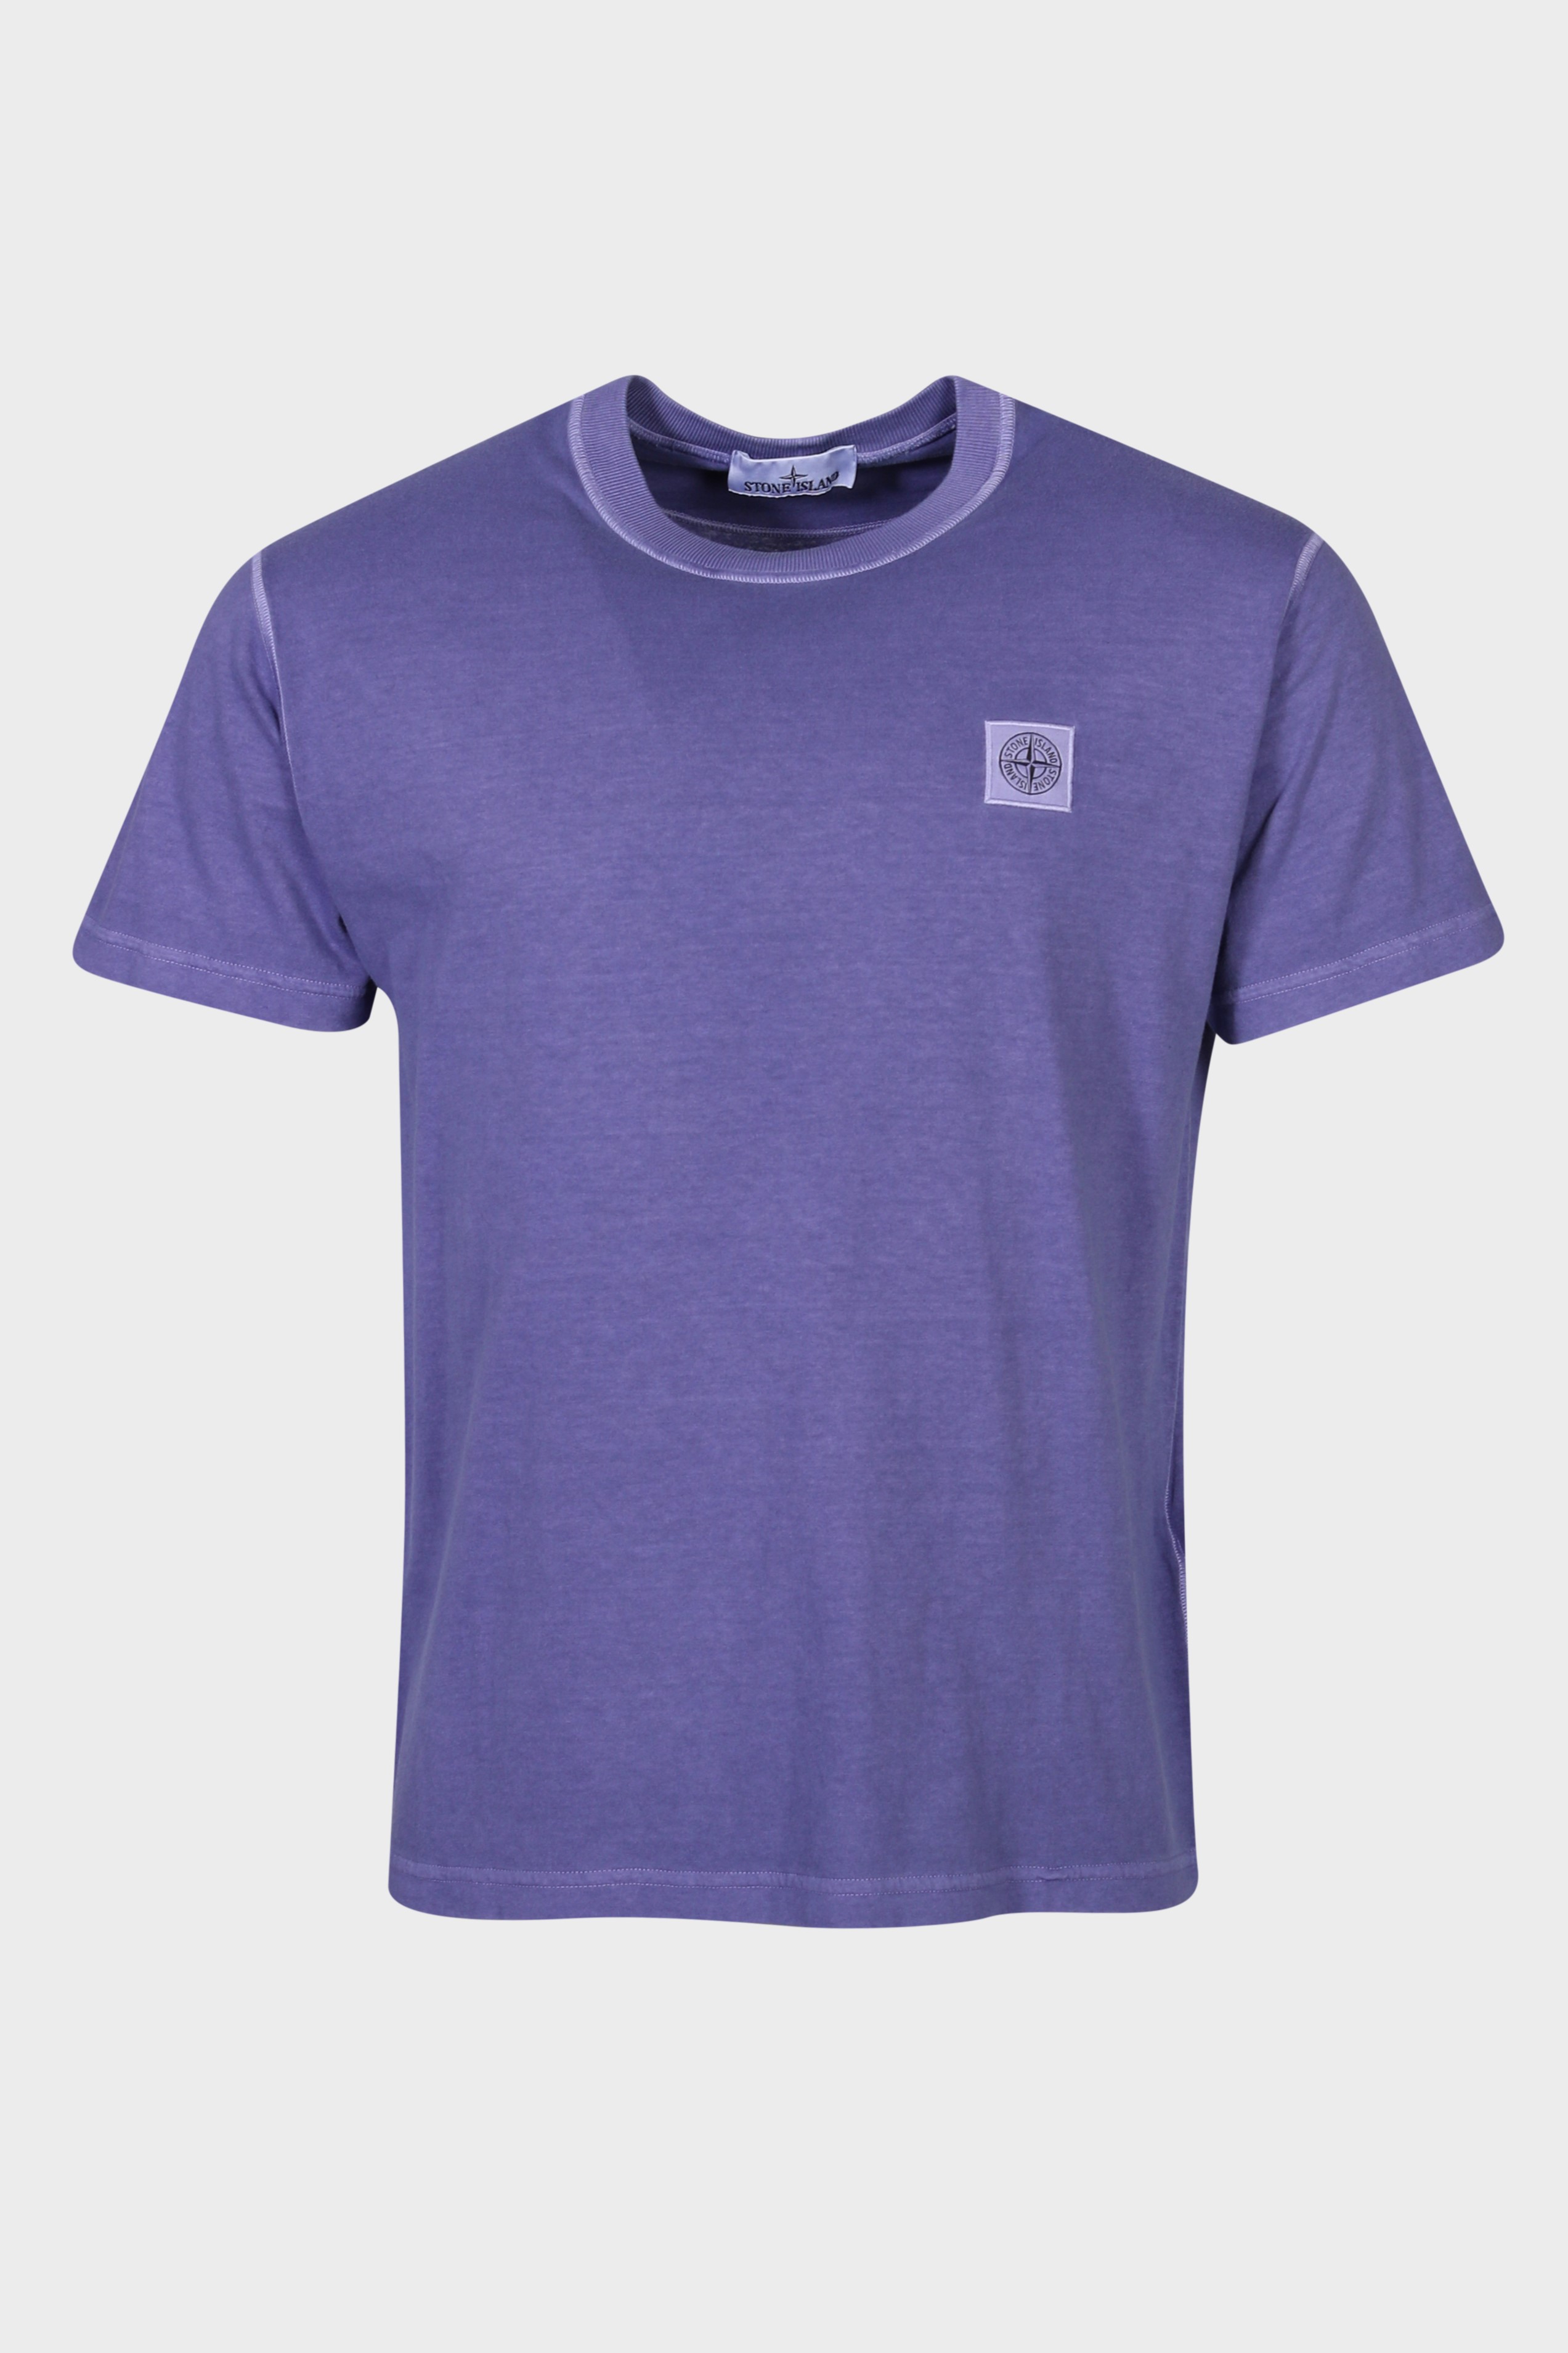 STONE ISLAND T-Shirt in Washed Lilac XL